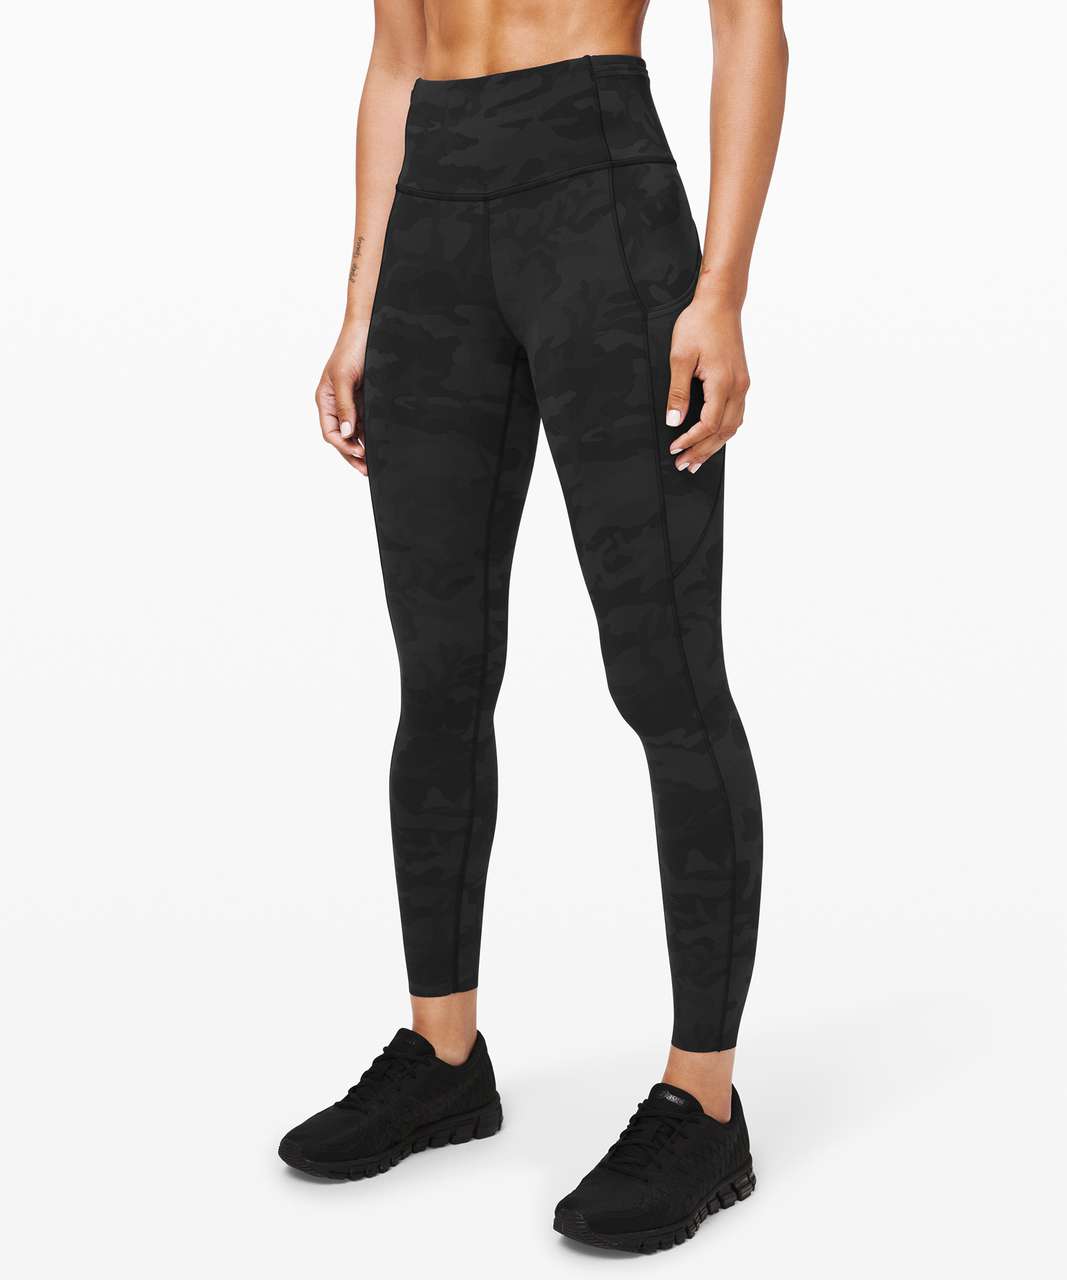 LULULEMON WOMEN'S FAST AND FREE TIGHT